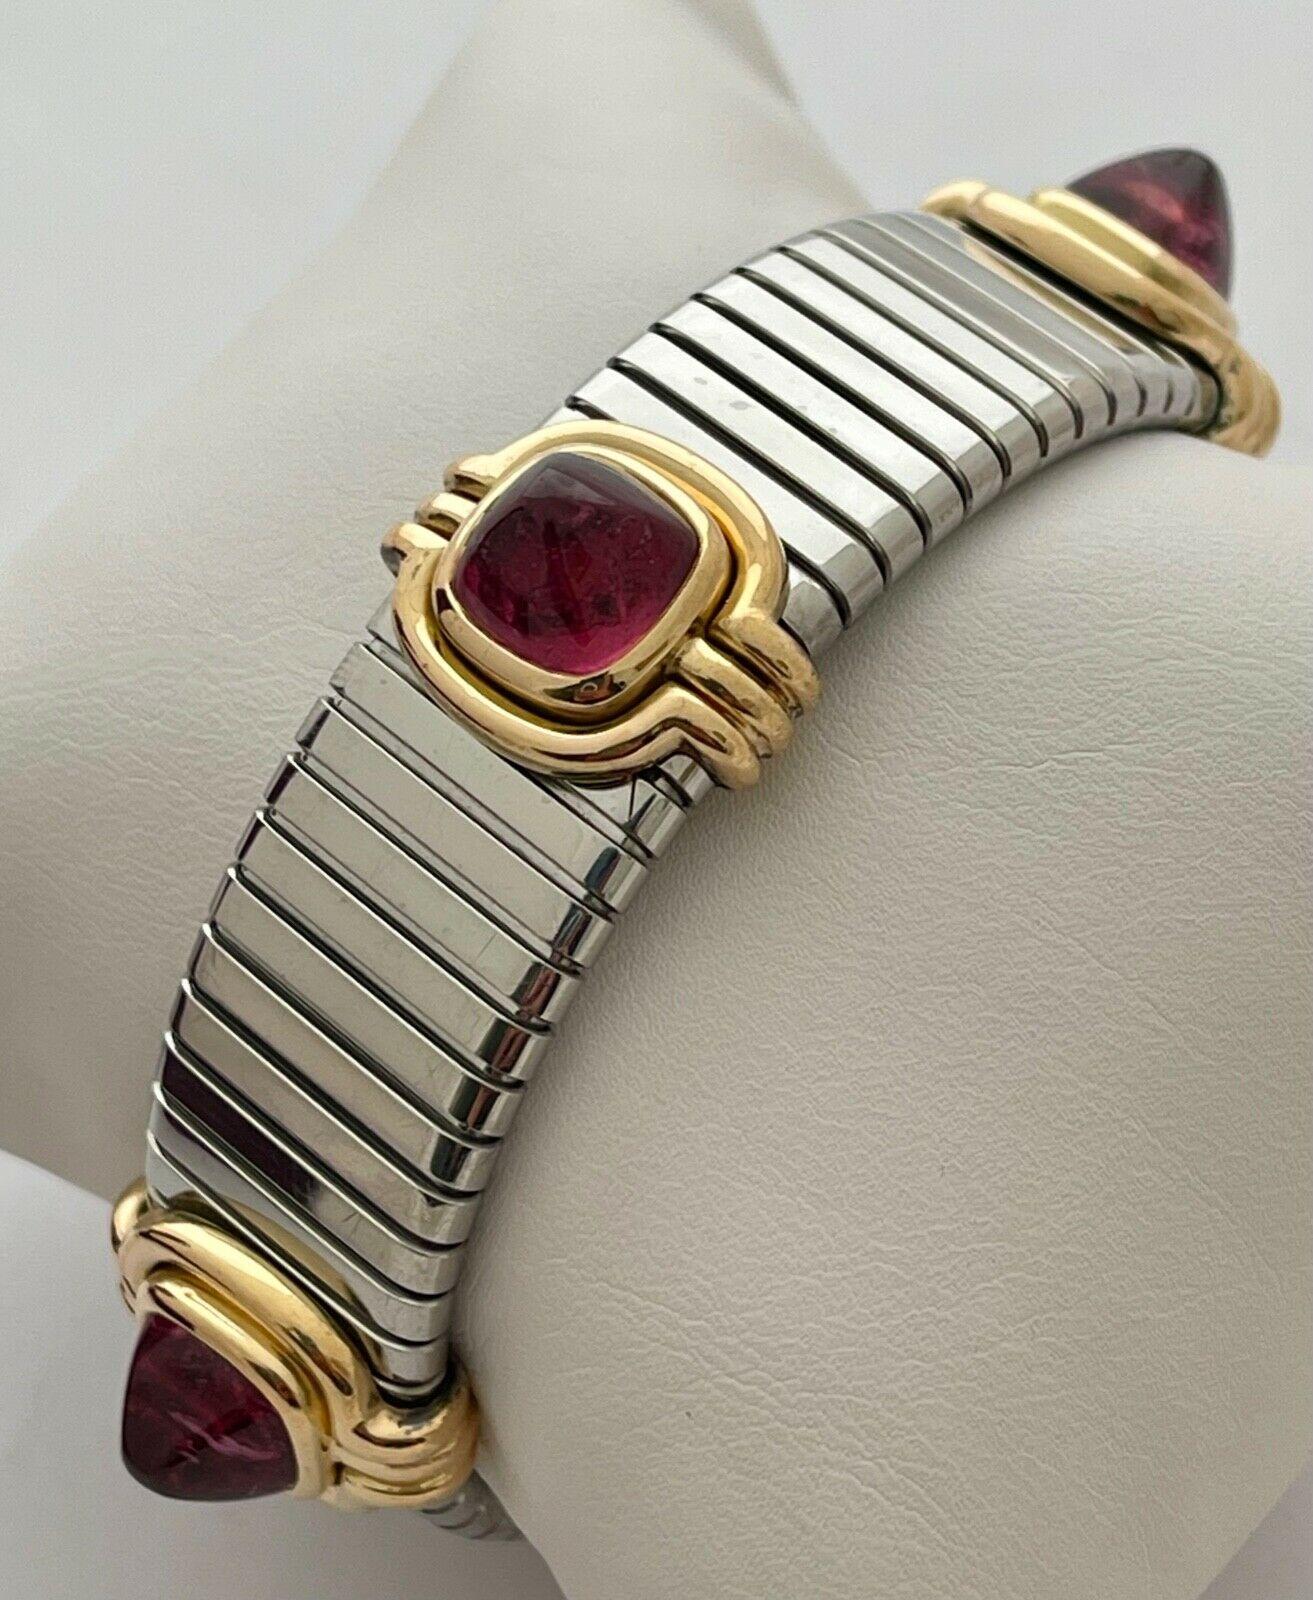 Bvlgari Italy 18k Yellow Gold, Stainless Steel & Pink Tourmaline Tubogas Bangle Bracelet Vintage

Here is your chance to purchase a beautiful and highly collectible designer bracelet.  Truly a great piece at a great price! 

The length will fit any